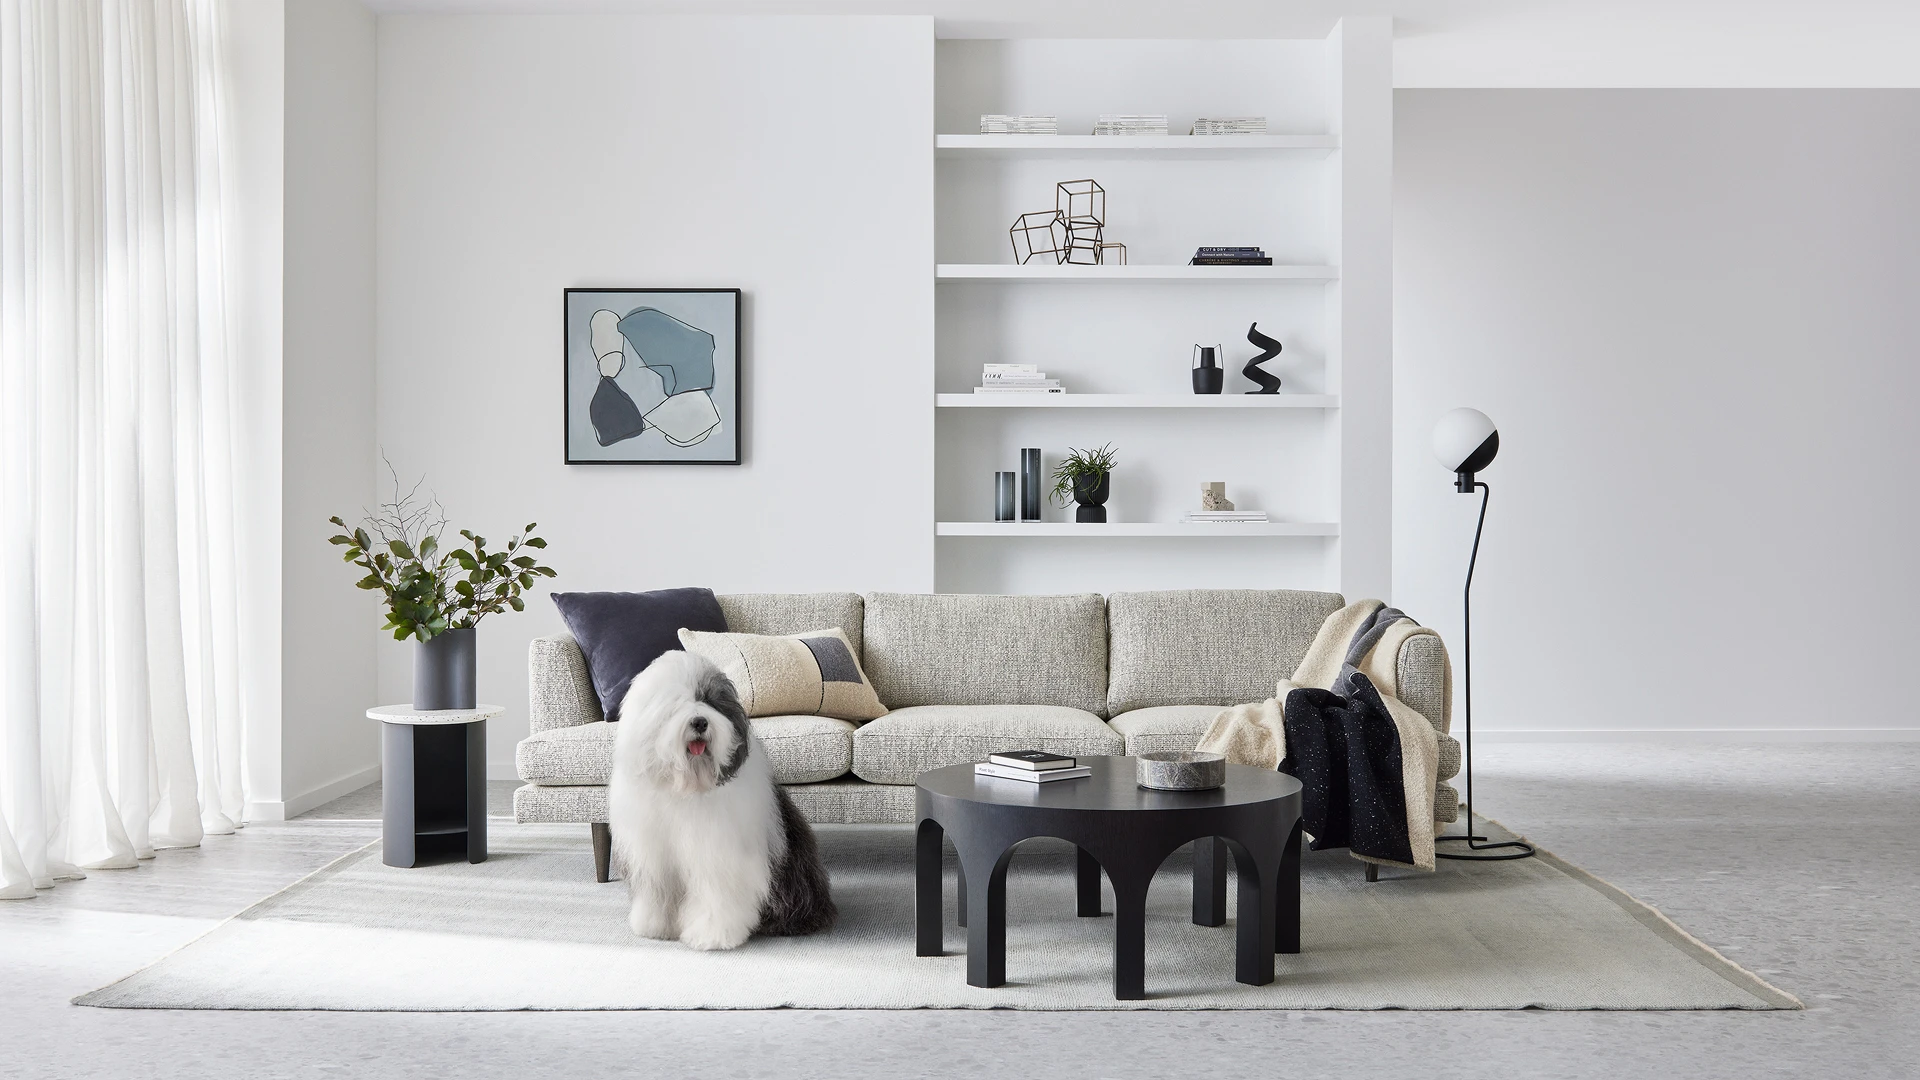 Interior living room with Lexicon Quarter featuring on back wall, Dulux dog, textured couch and coffee table.